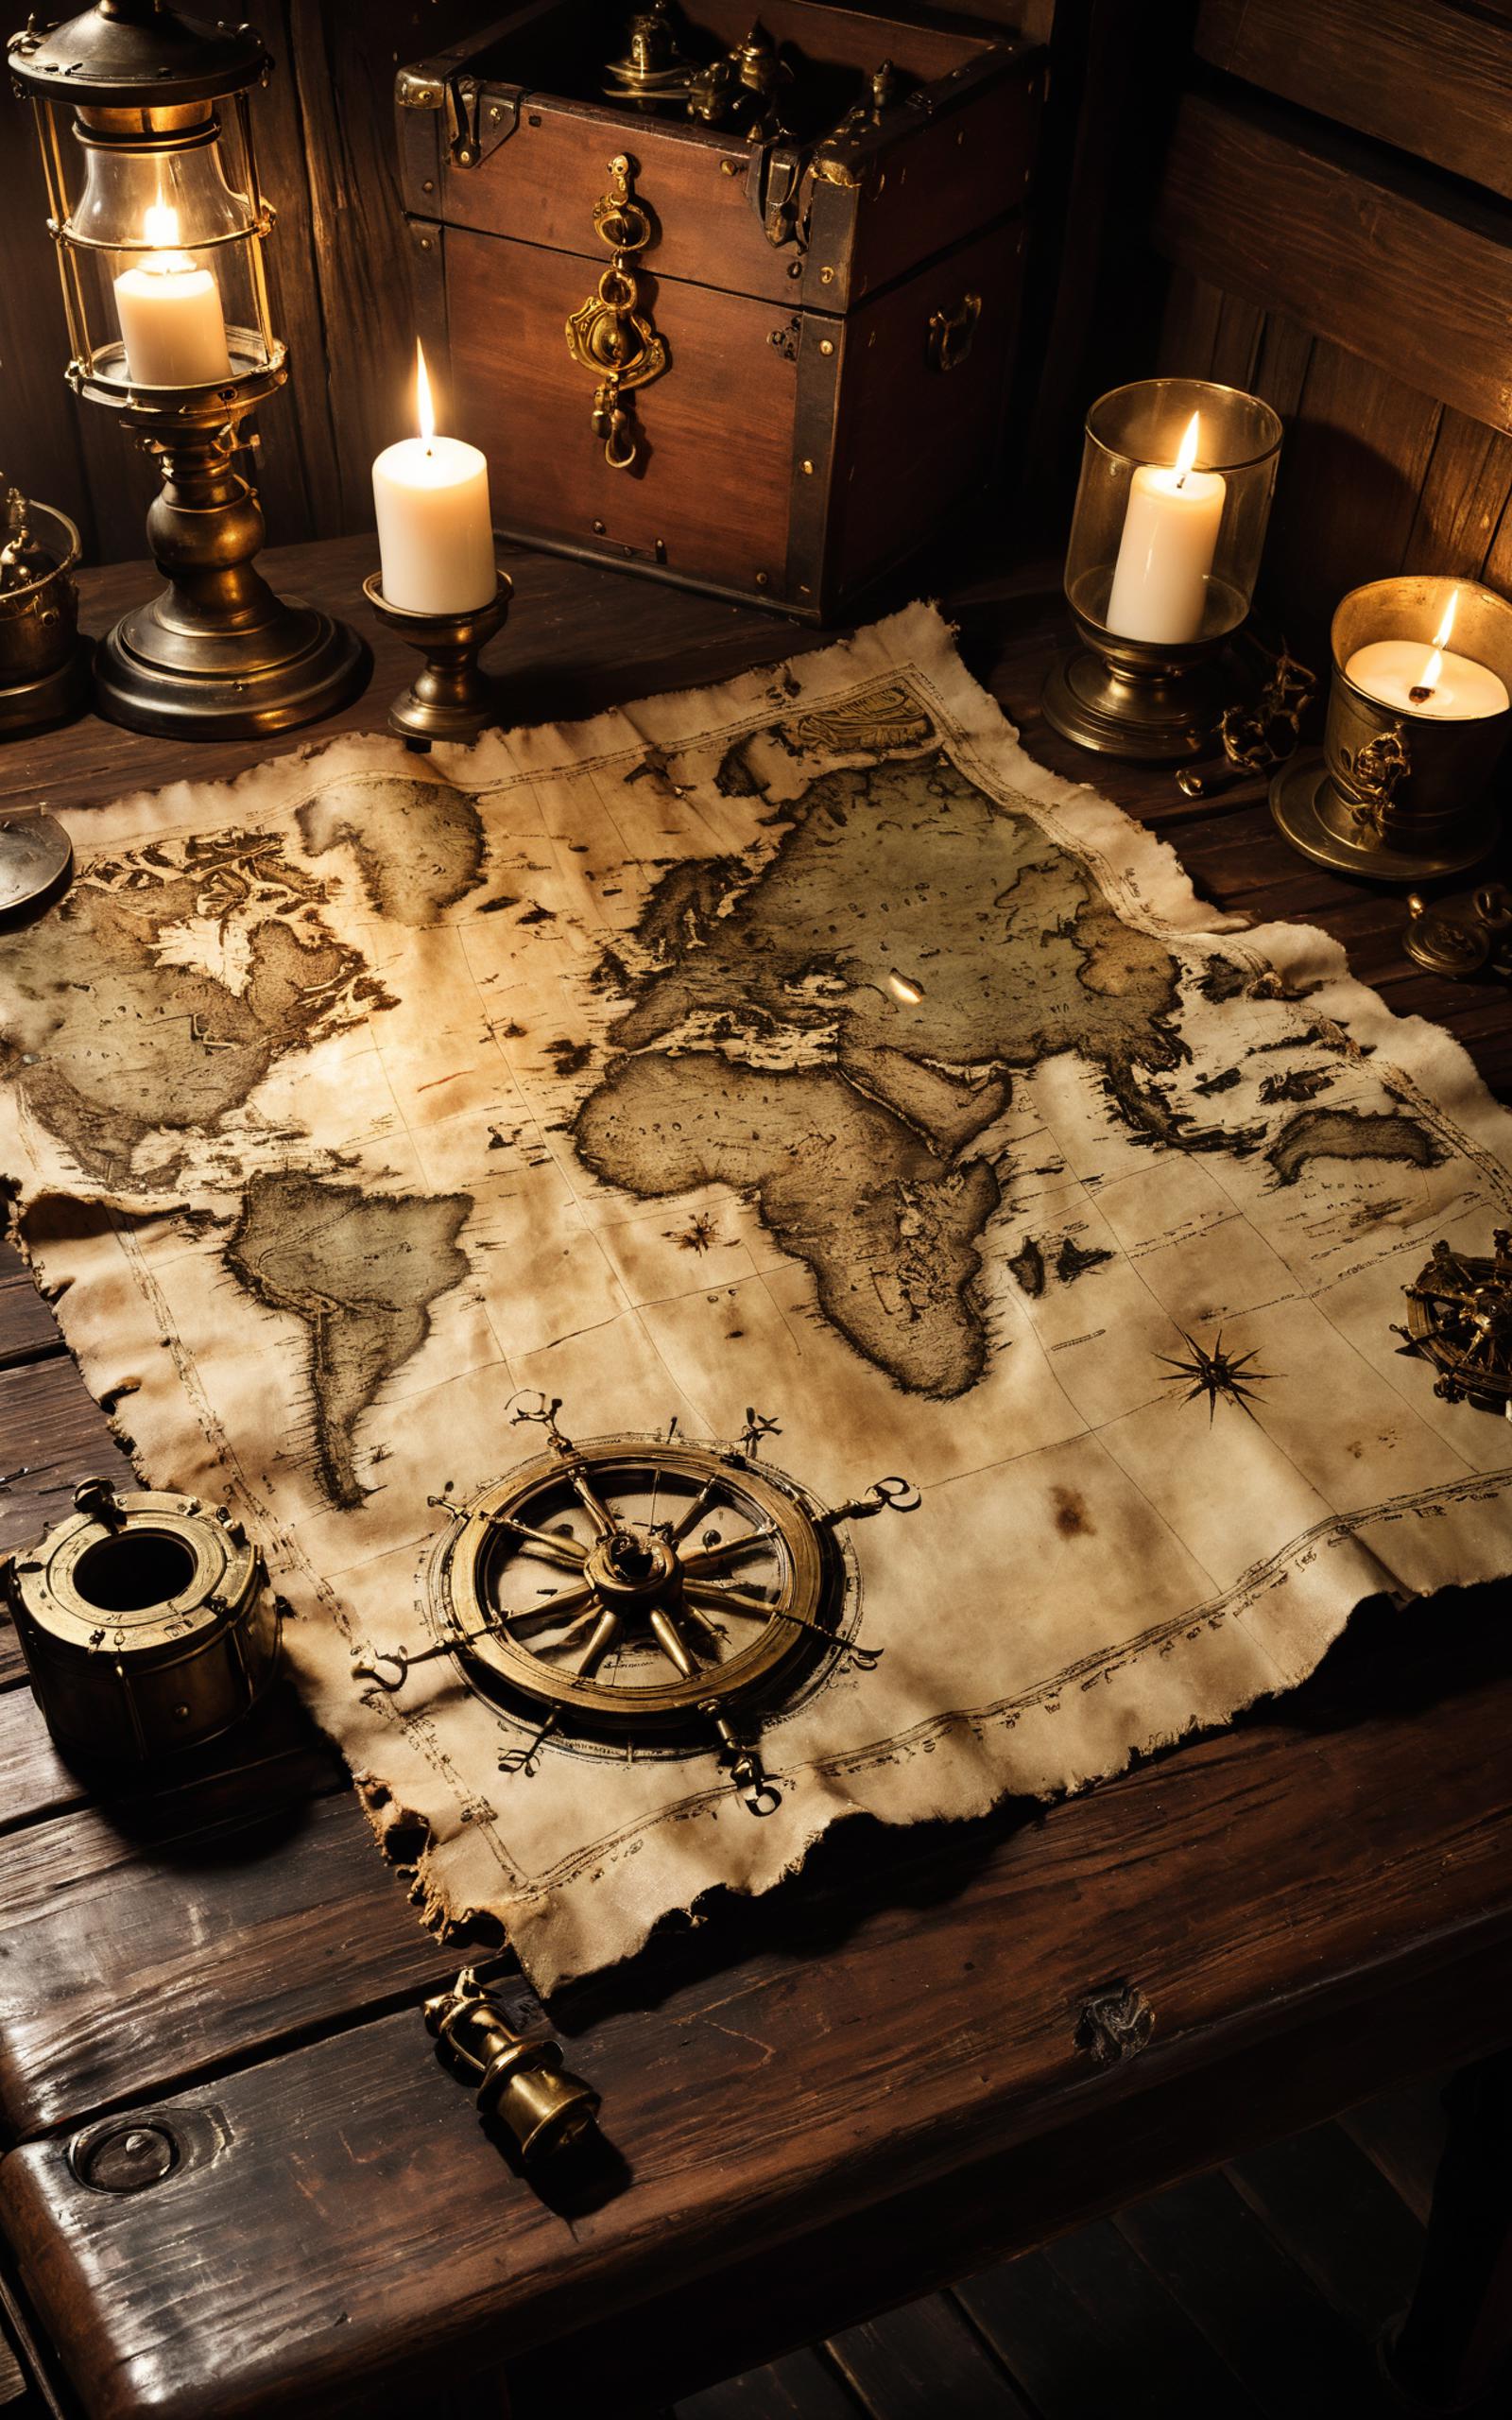 An antique map of the world with a compass on it, sitting on a wooden table surrounded by candles.